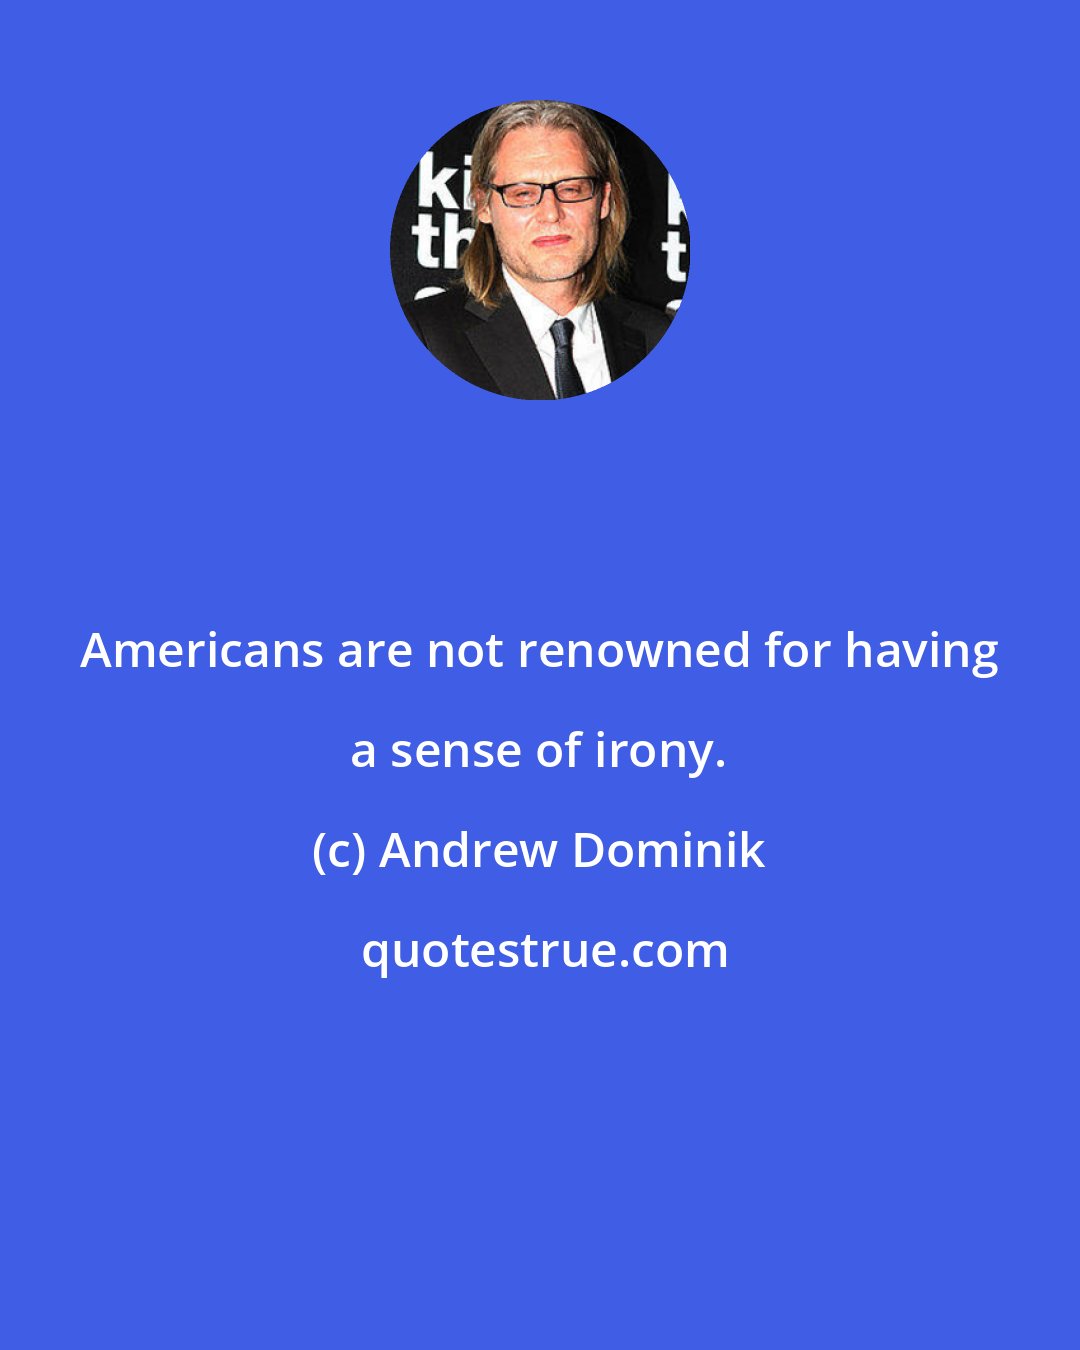 Andrew Dominik: Americans are not renowned for having a sense of irony.